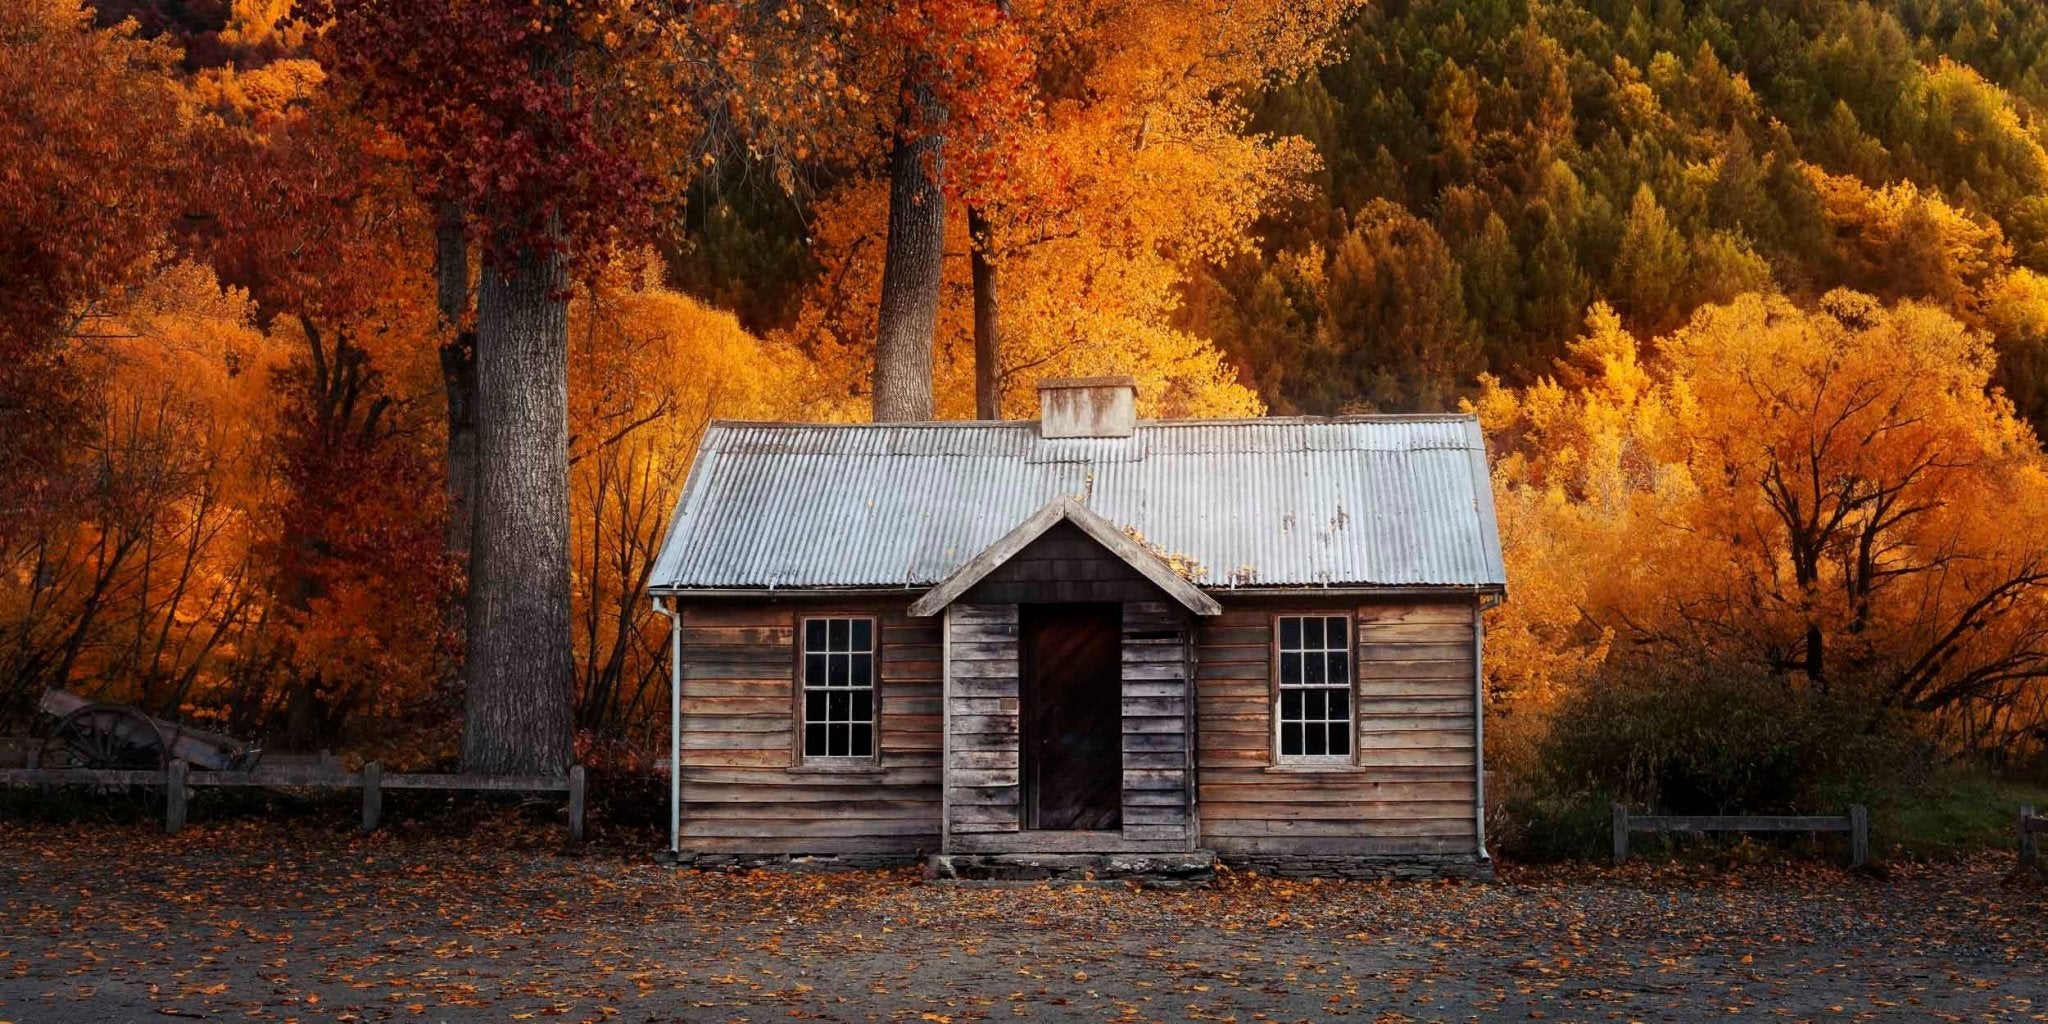 "The Cottage" Arrowtown, New Zealand